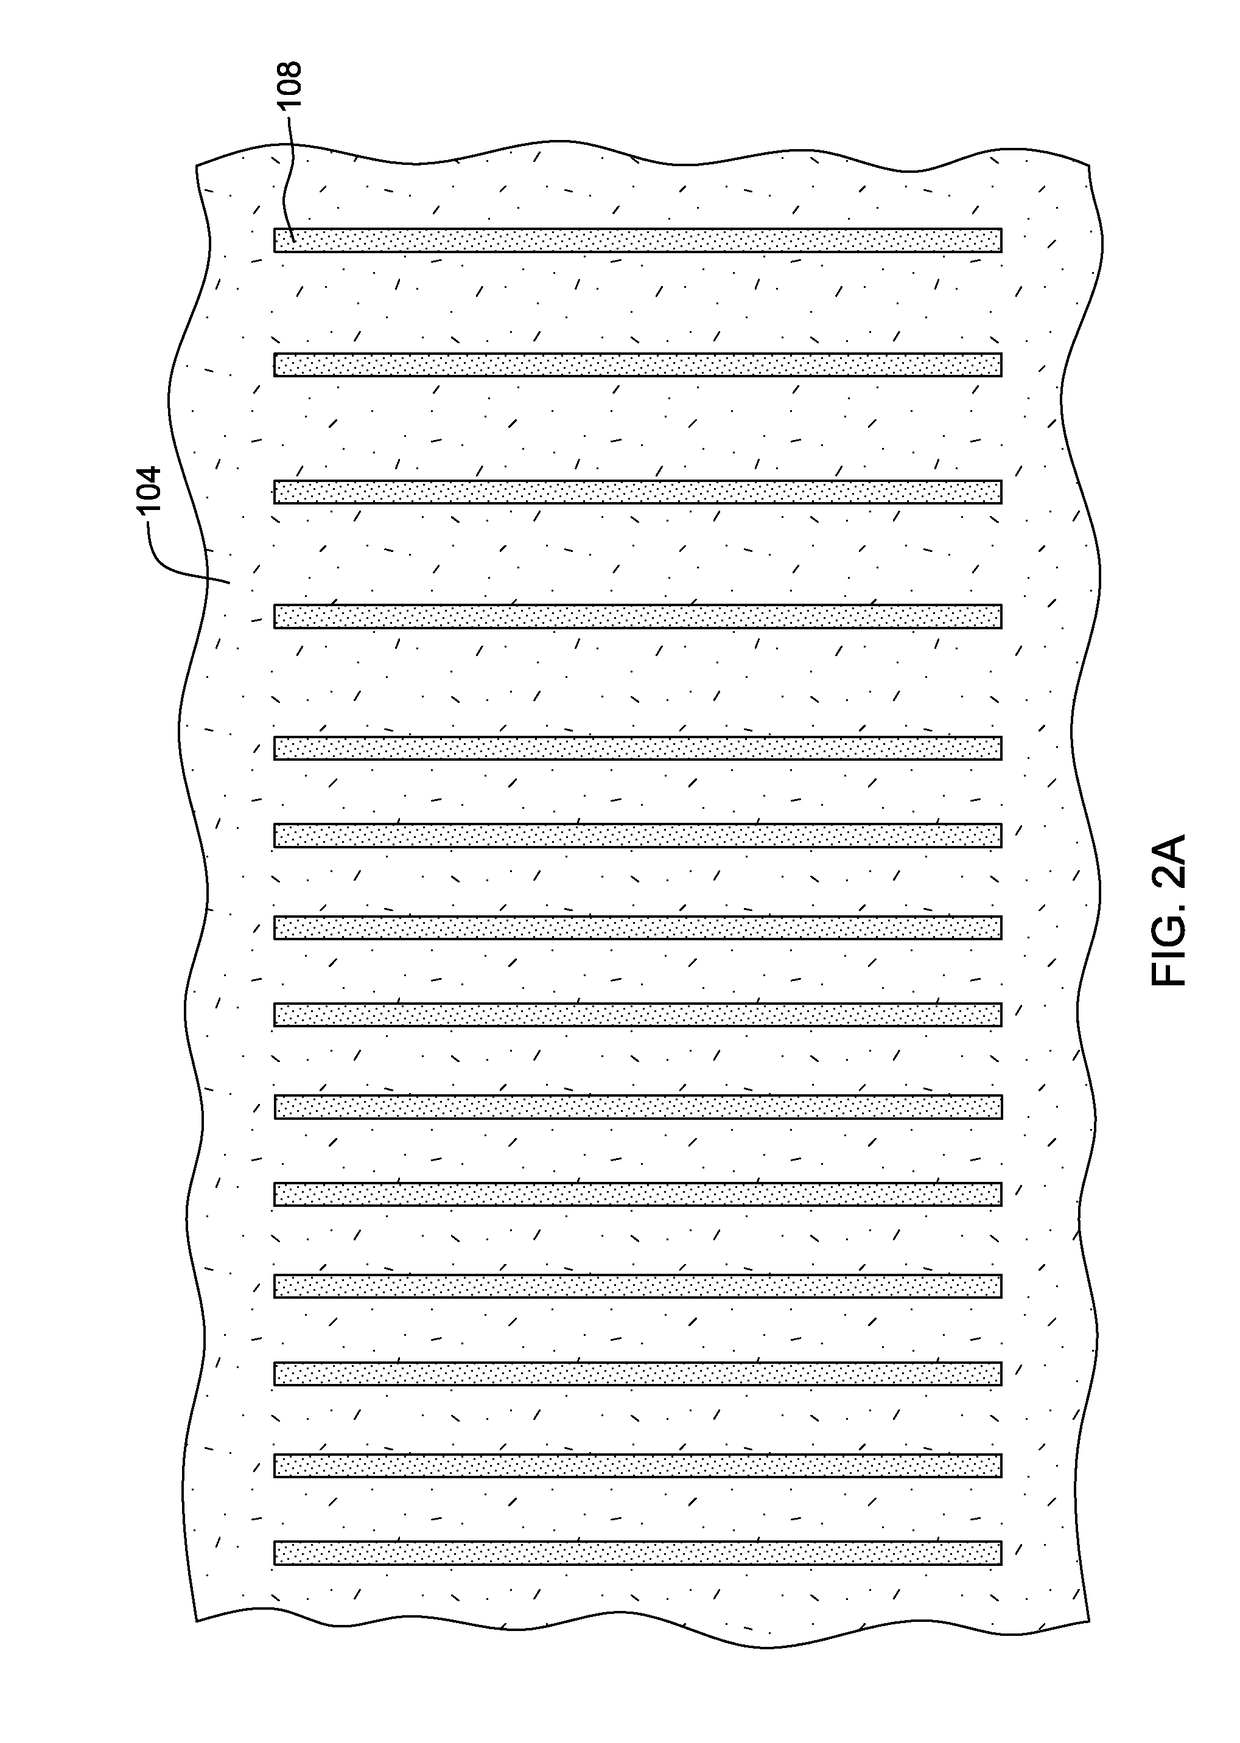 Alternating space decomposition in circuit structure fabrication